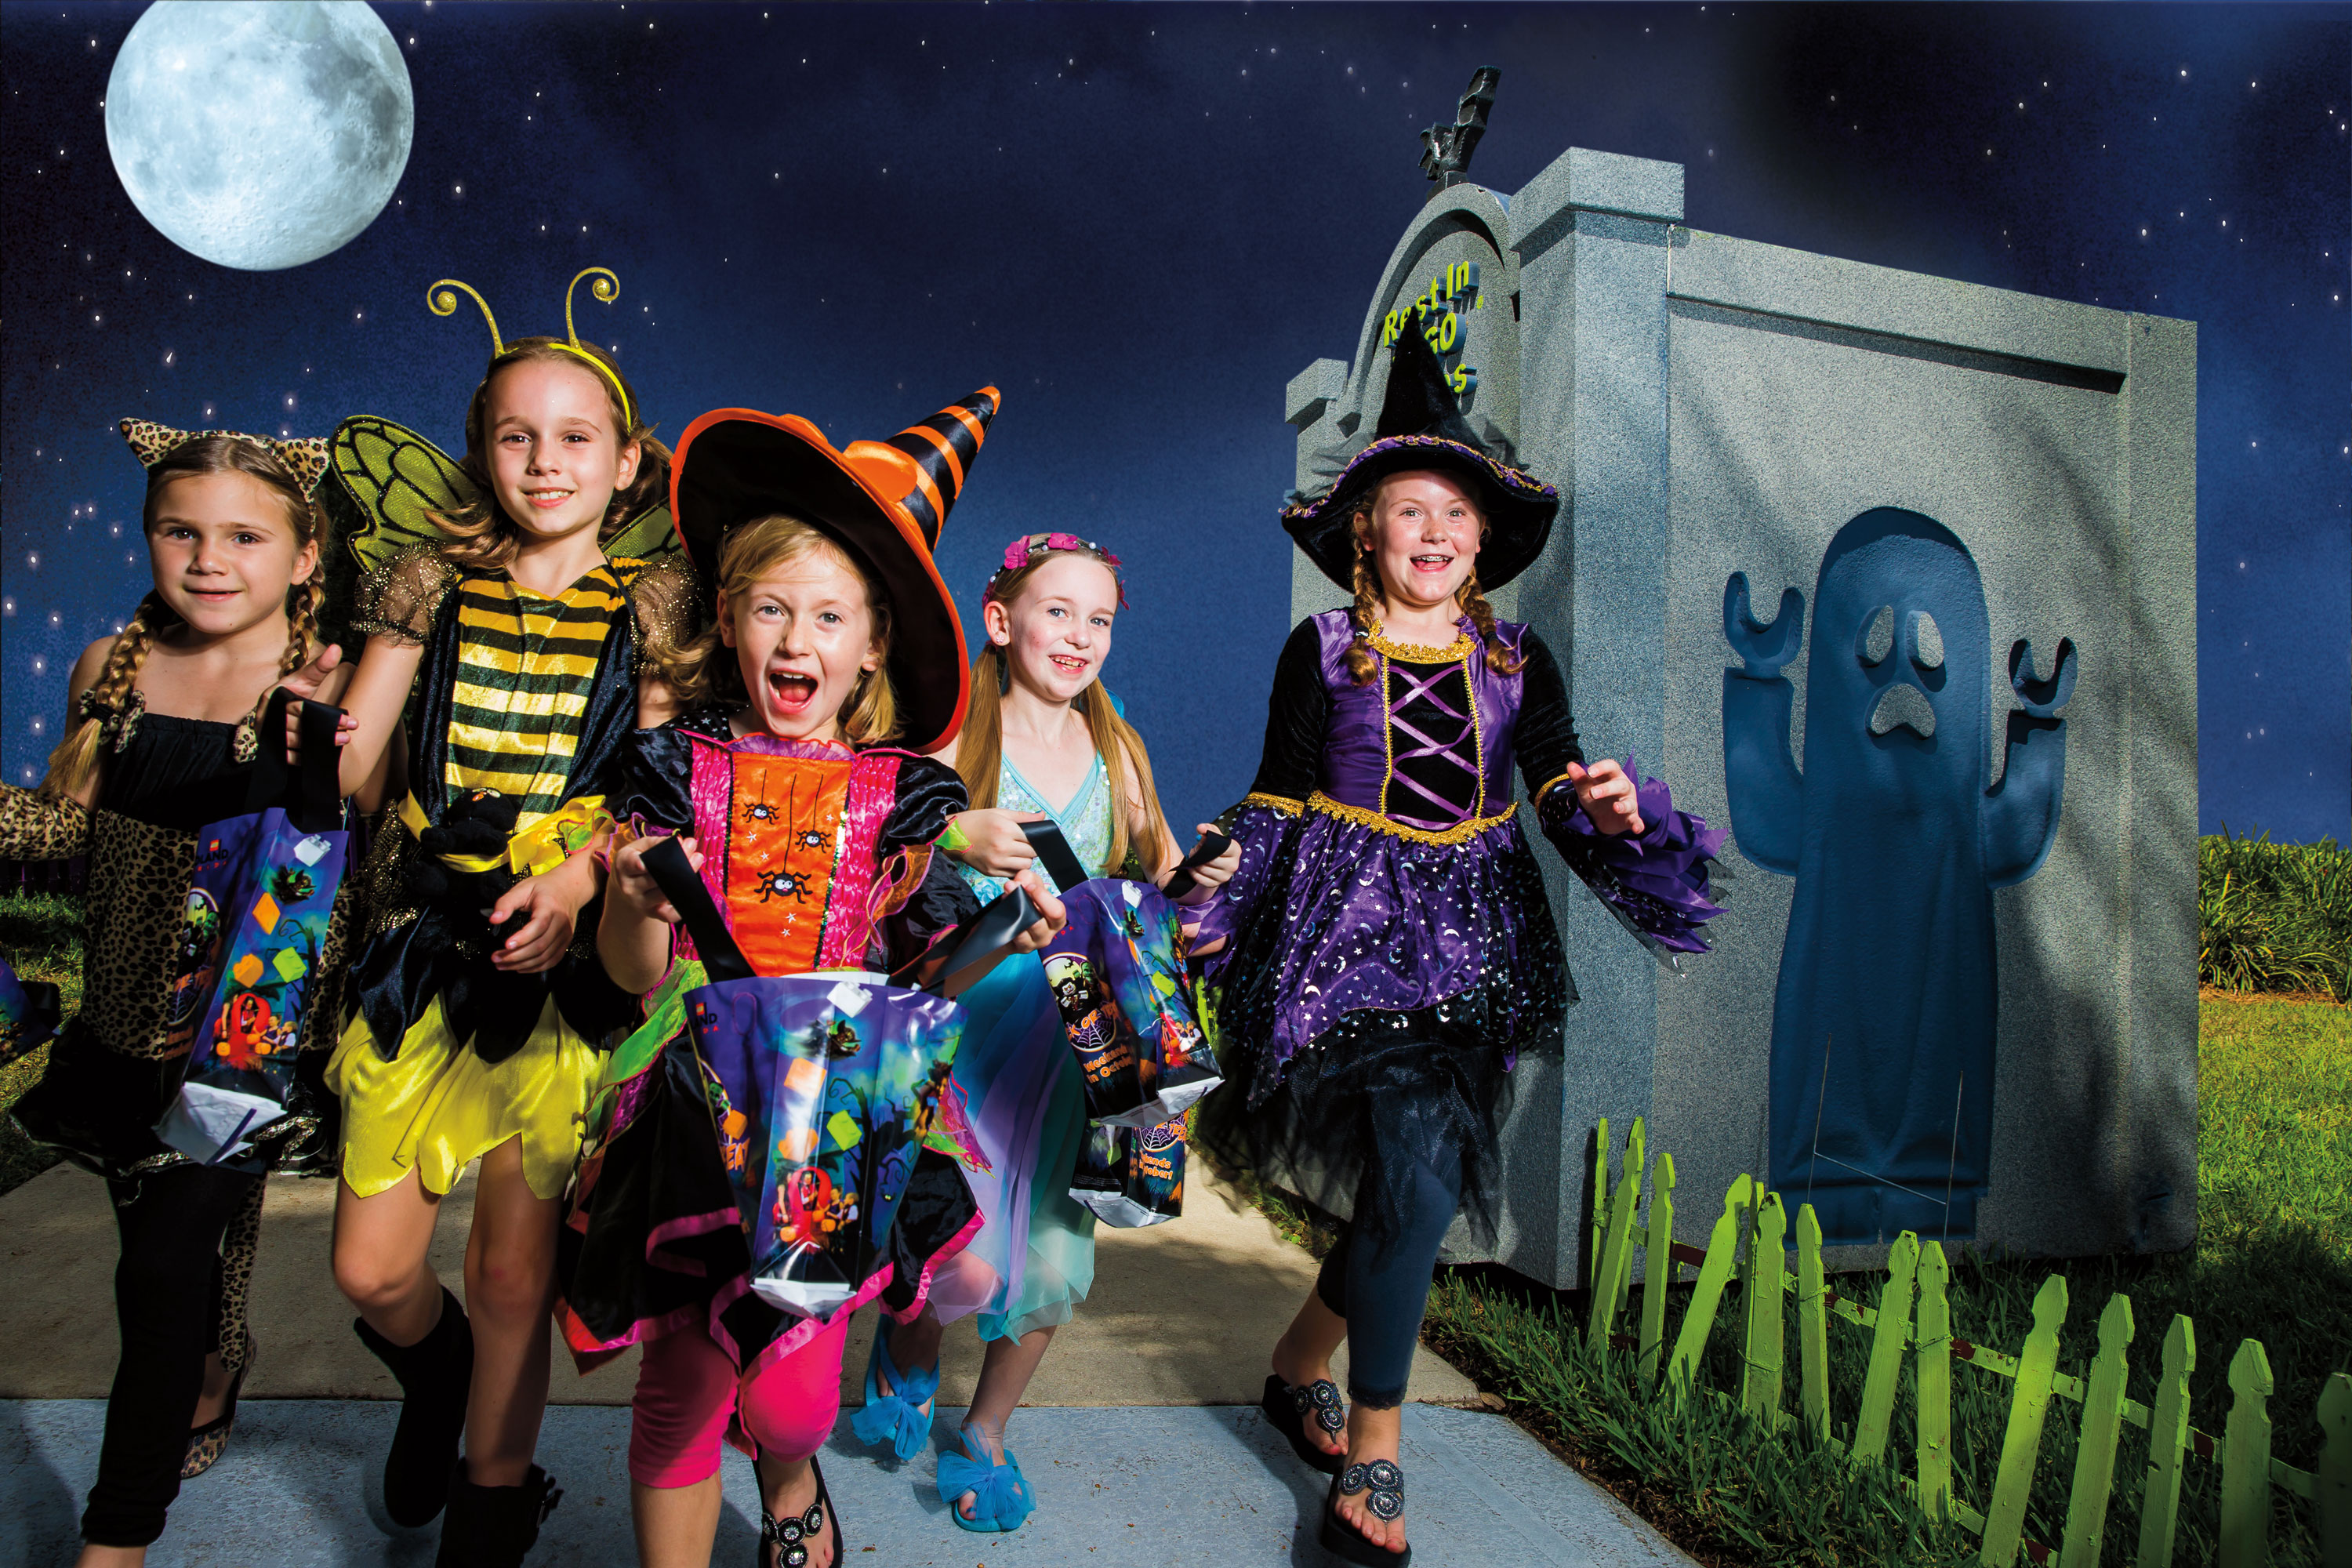 A group of girls dressed up in Halloween costumes go brick-or-treating